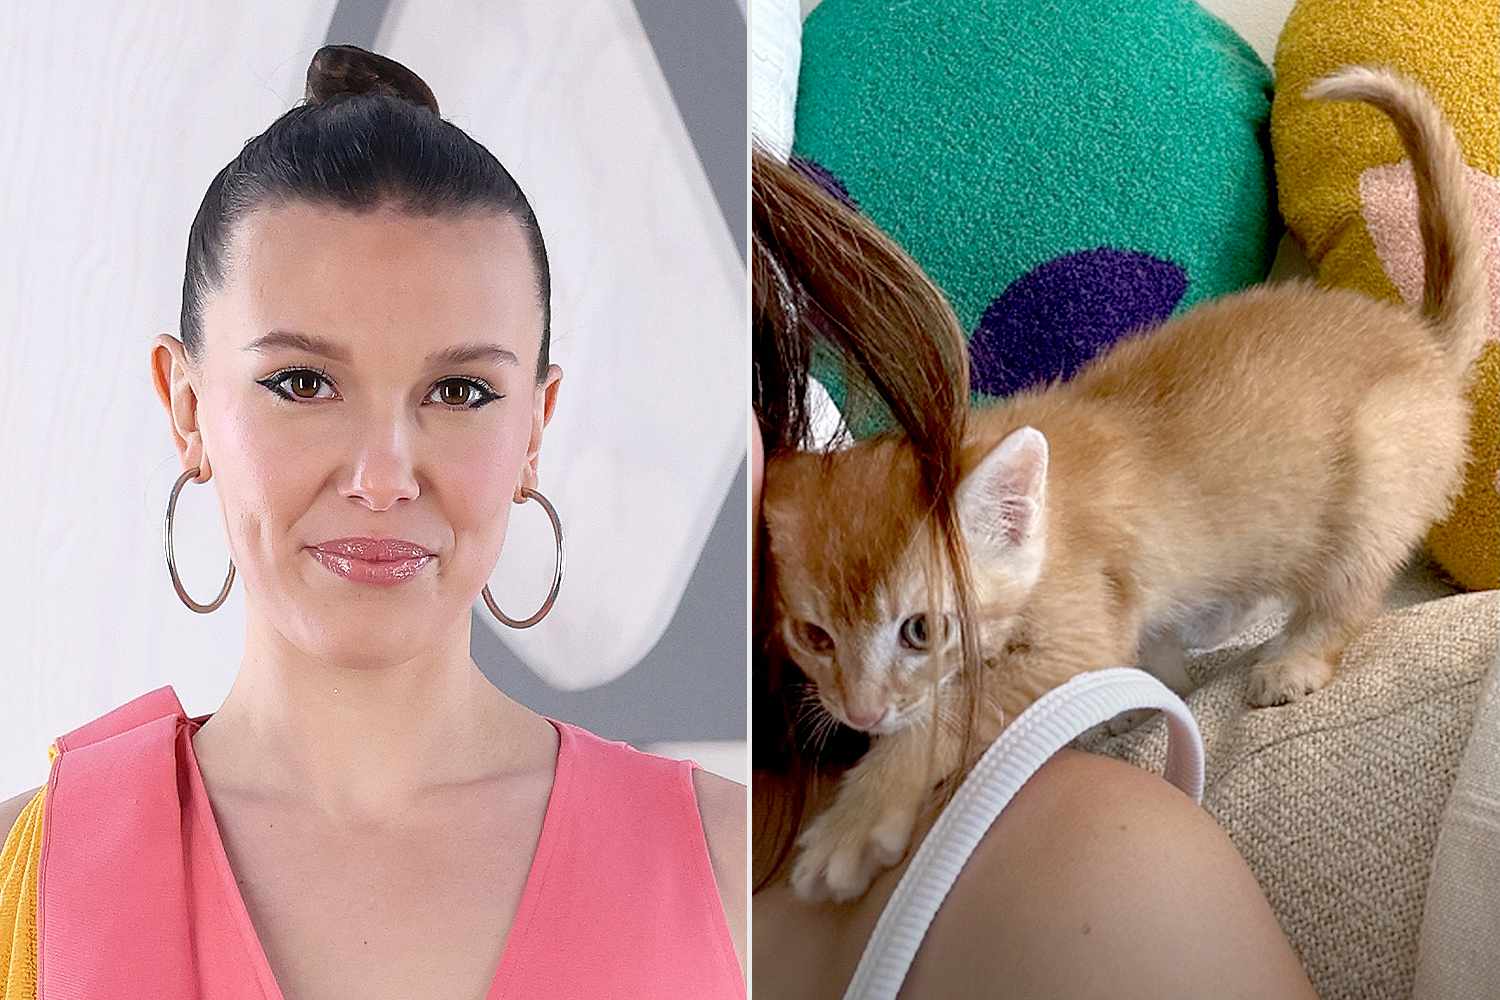 Millie Bobby Brown Fosters 'Handsome' New Kitten Following Marriage to Jake Bongiovi